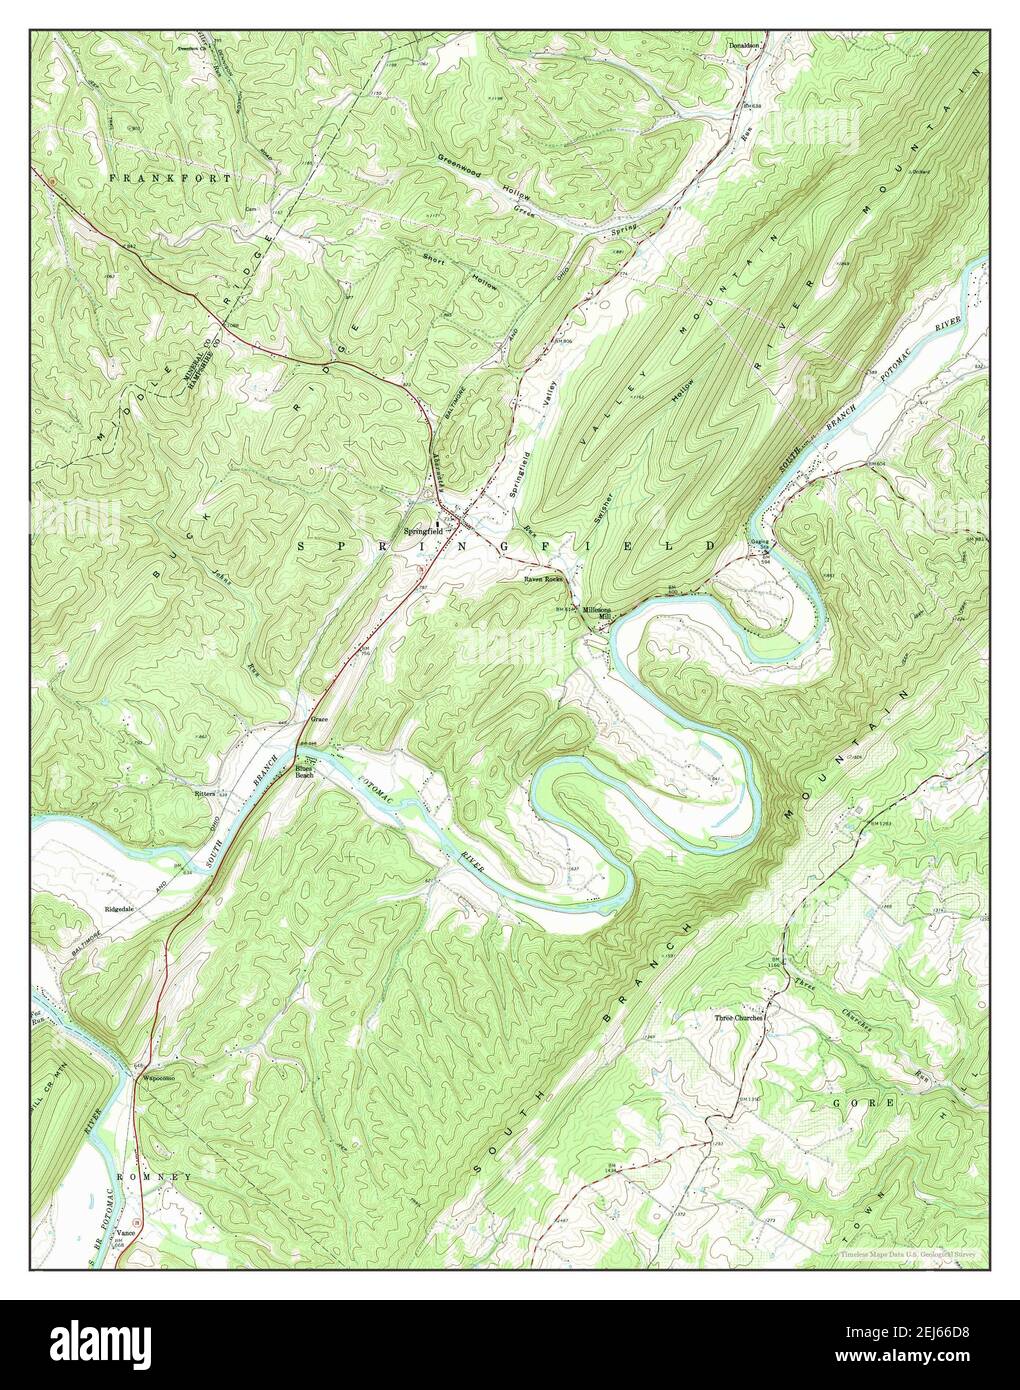 Springfield, West Virginia, map 1973, 1:24000, United States of America by Timeless Maps, data U.S. Geological Survey Stock Photo